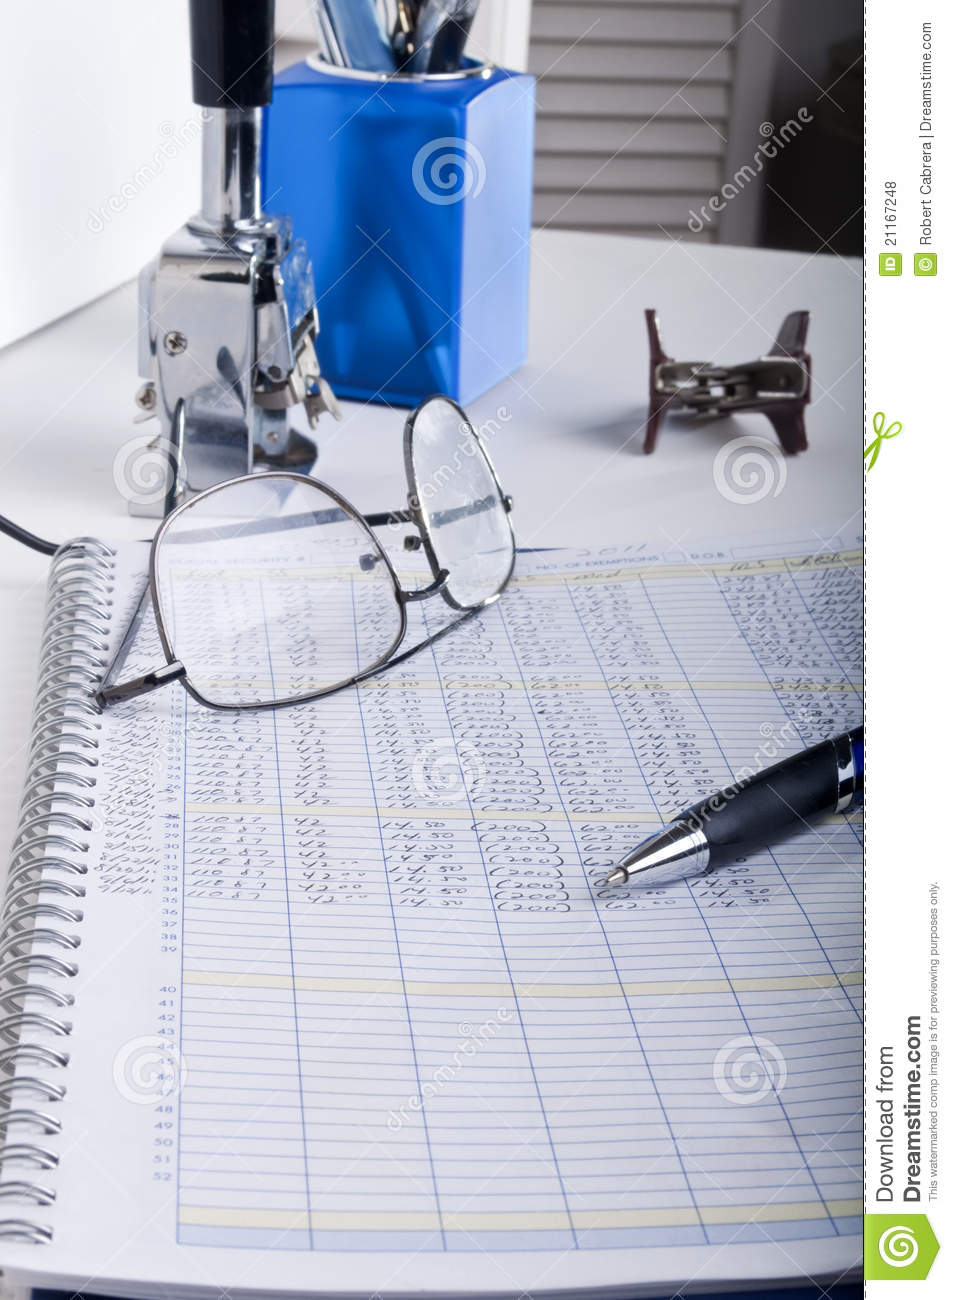 Accounting Ledger Office Desk Royalty Free Stock Photos   Image